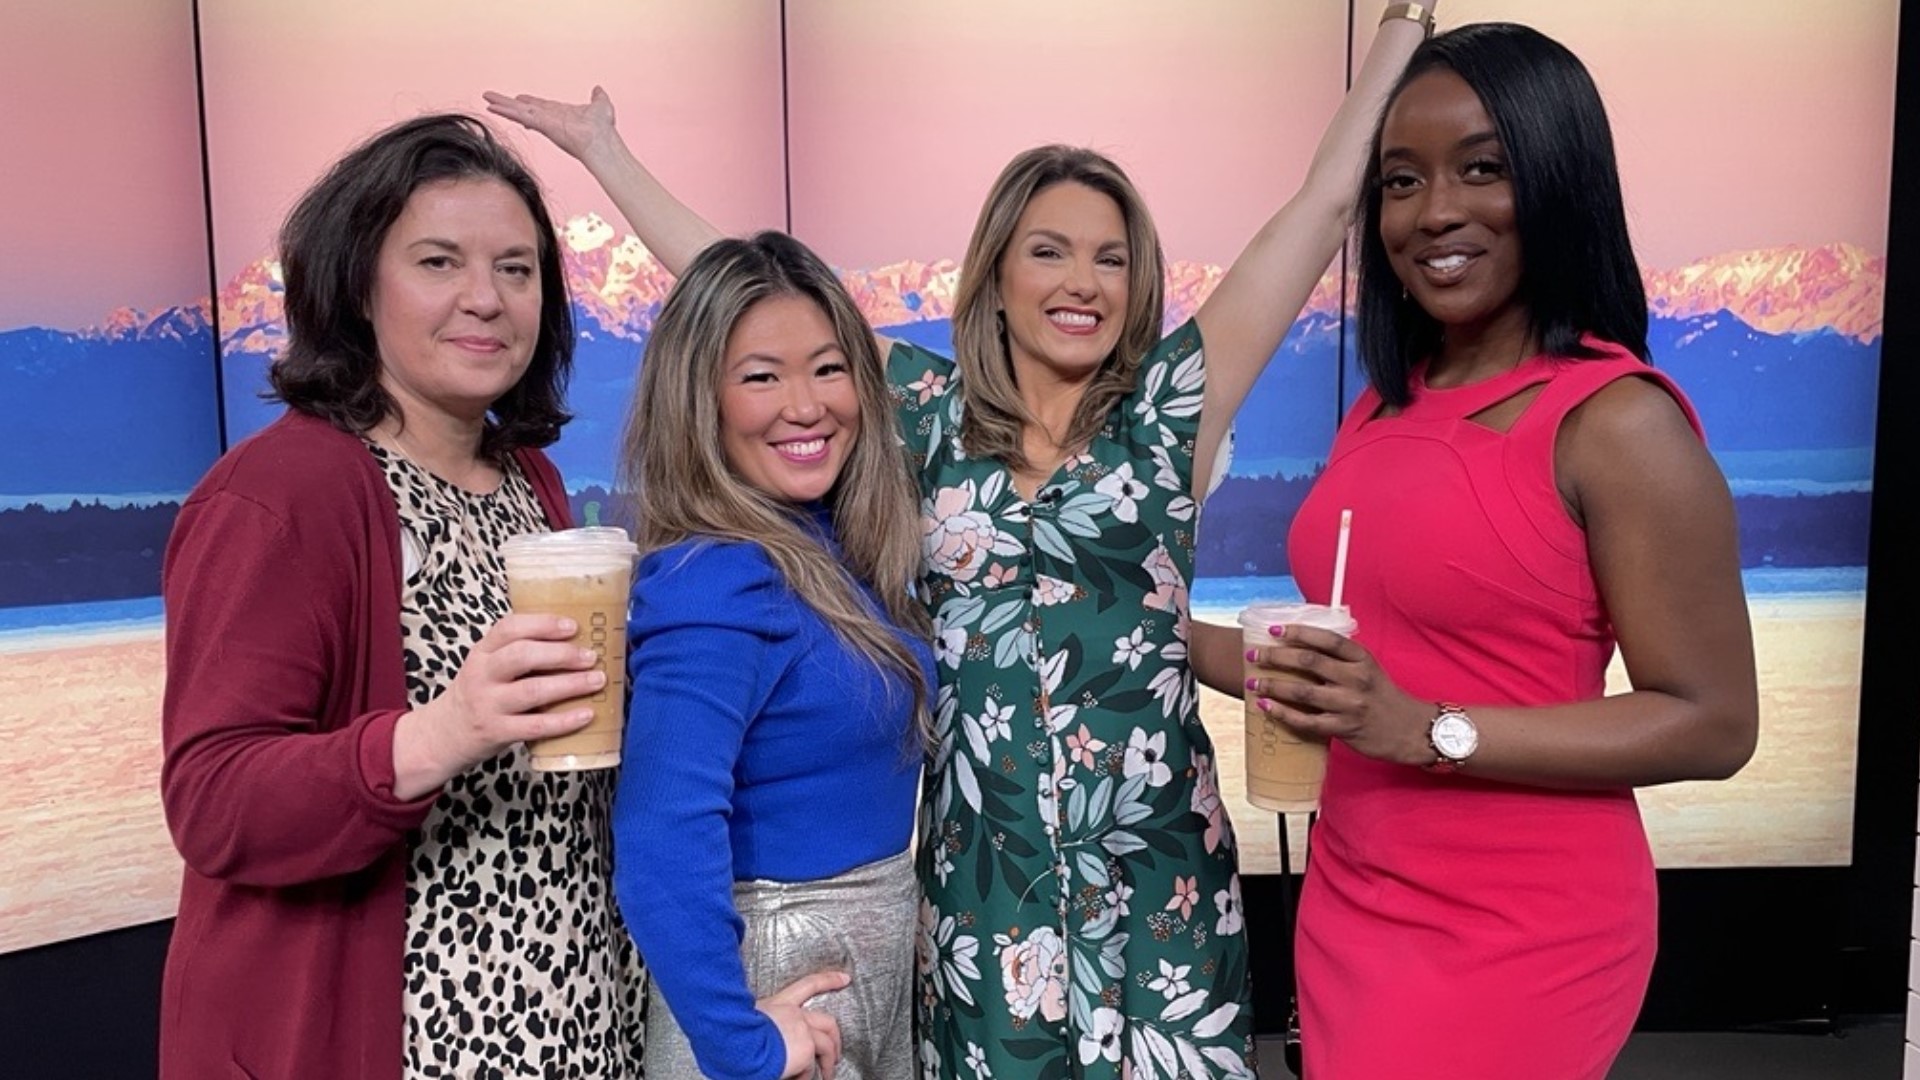 Our Hot Topics panel weighs in on the firestorm caused by formula shortages, plus Starbucks' new Chocolate Cream Cold Brew, and more! #newdaynw